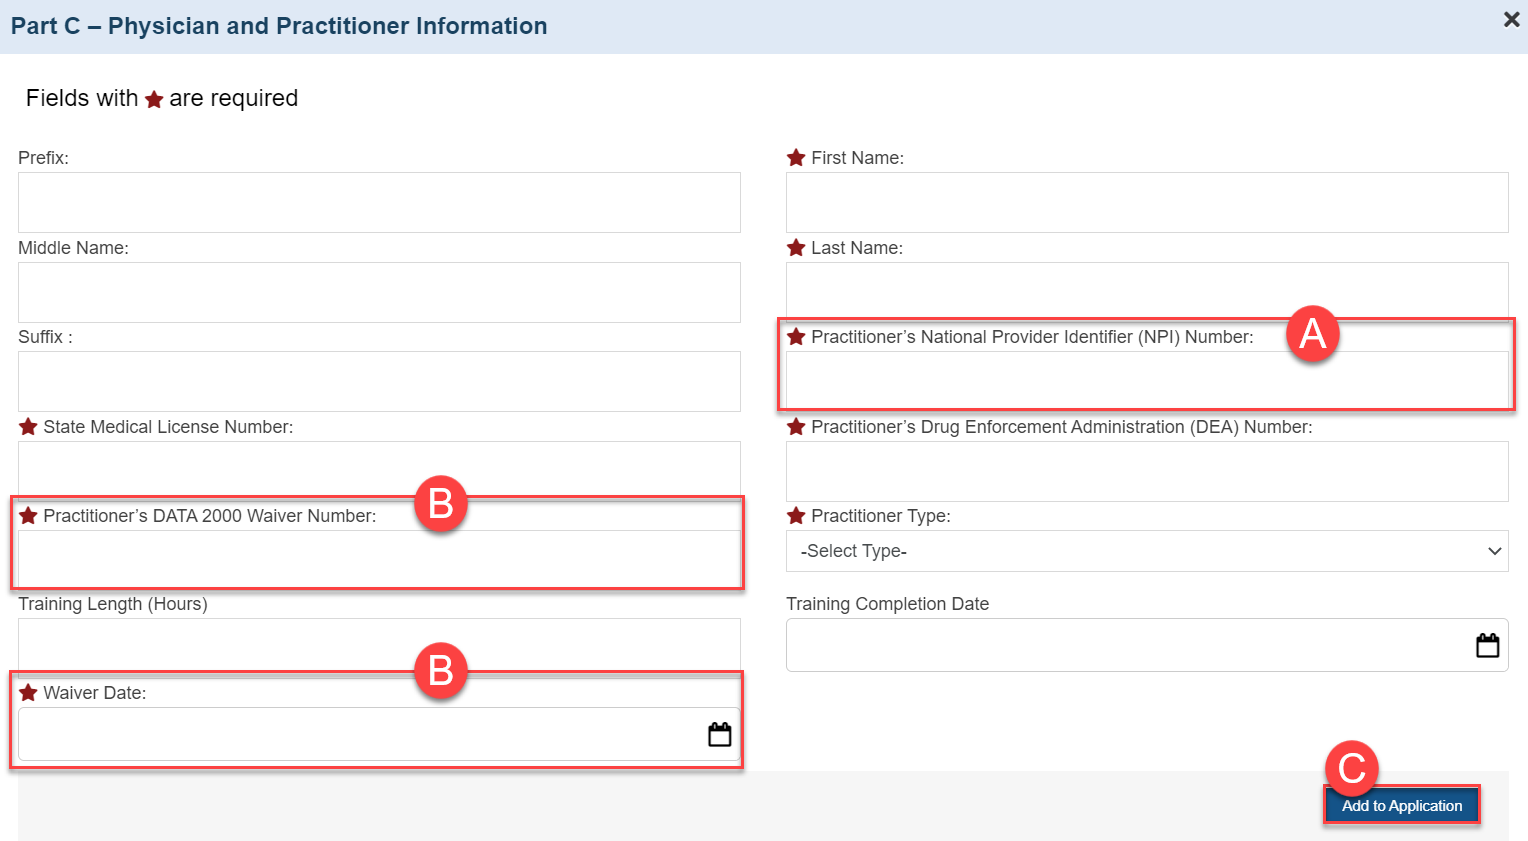 Screenshot of Physician and Practitioner Information form